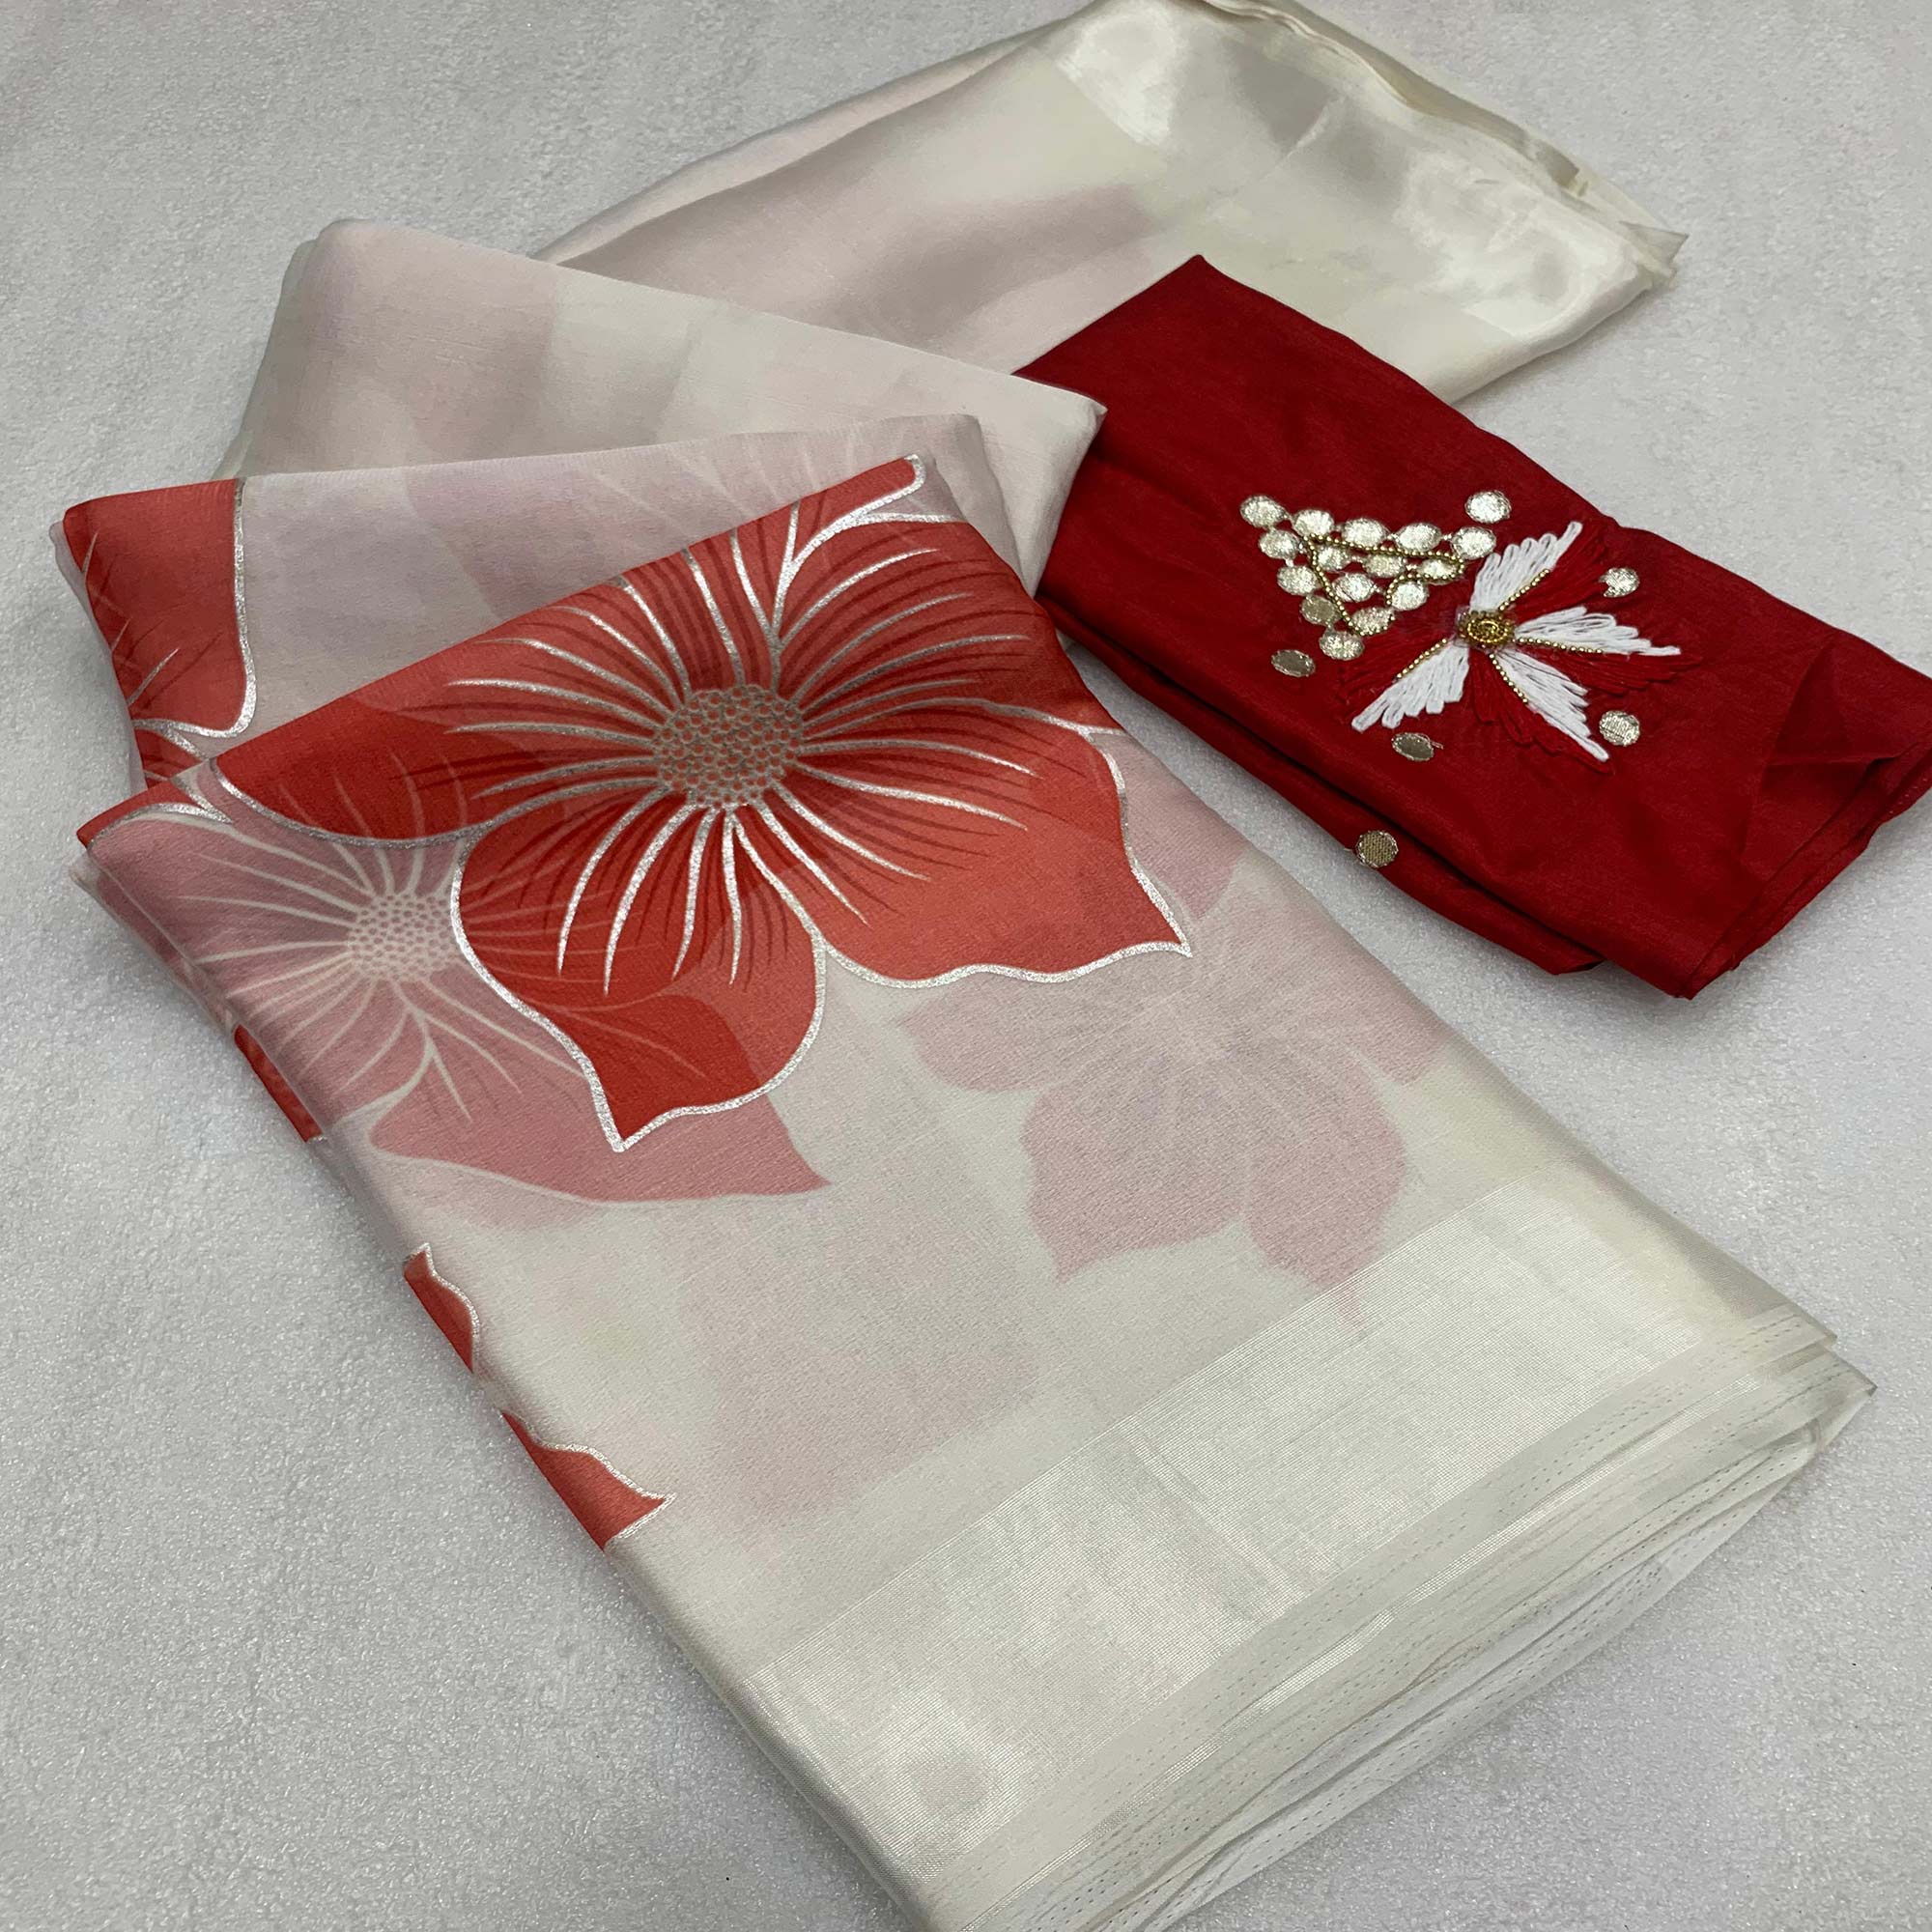 White & Red Floral Foil Printed Organza Saree